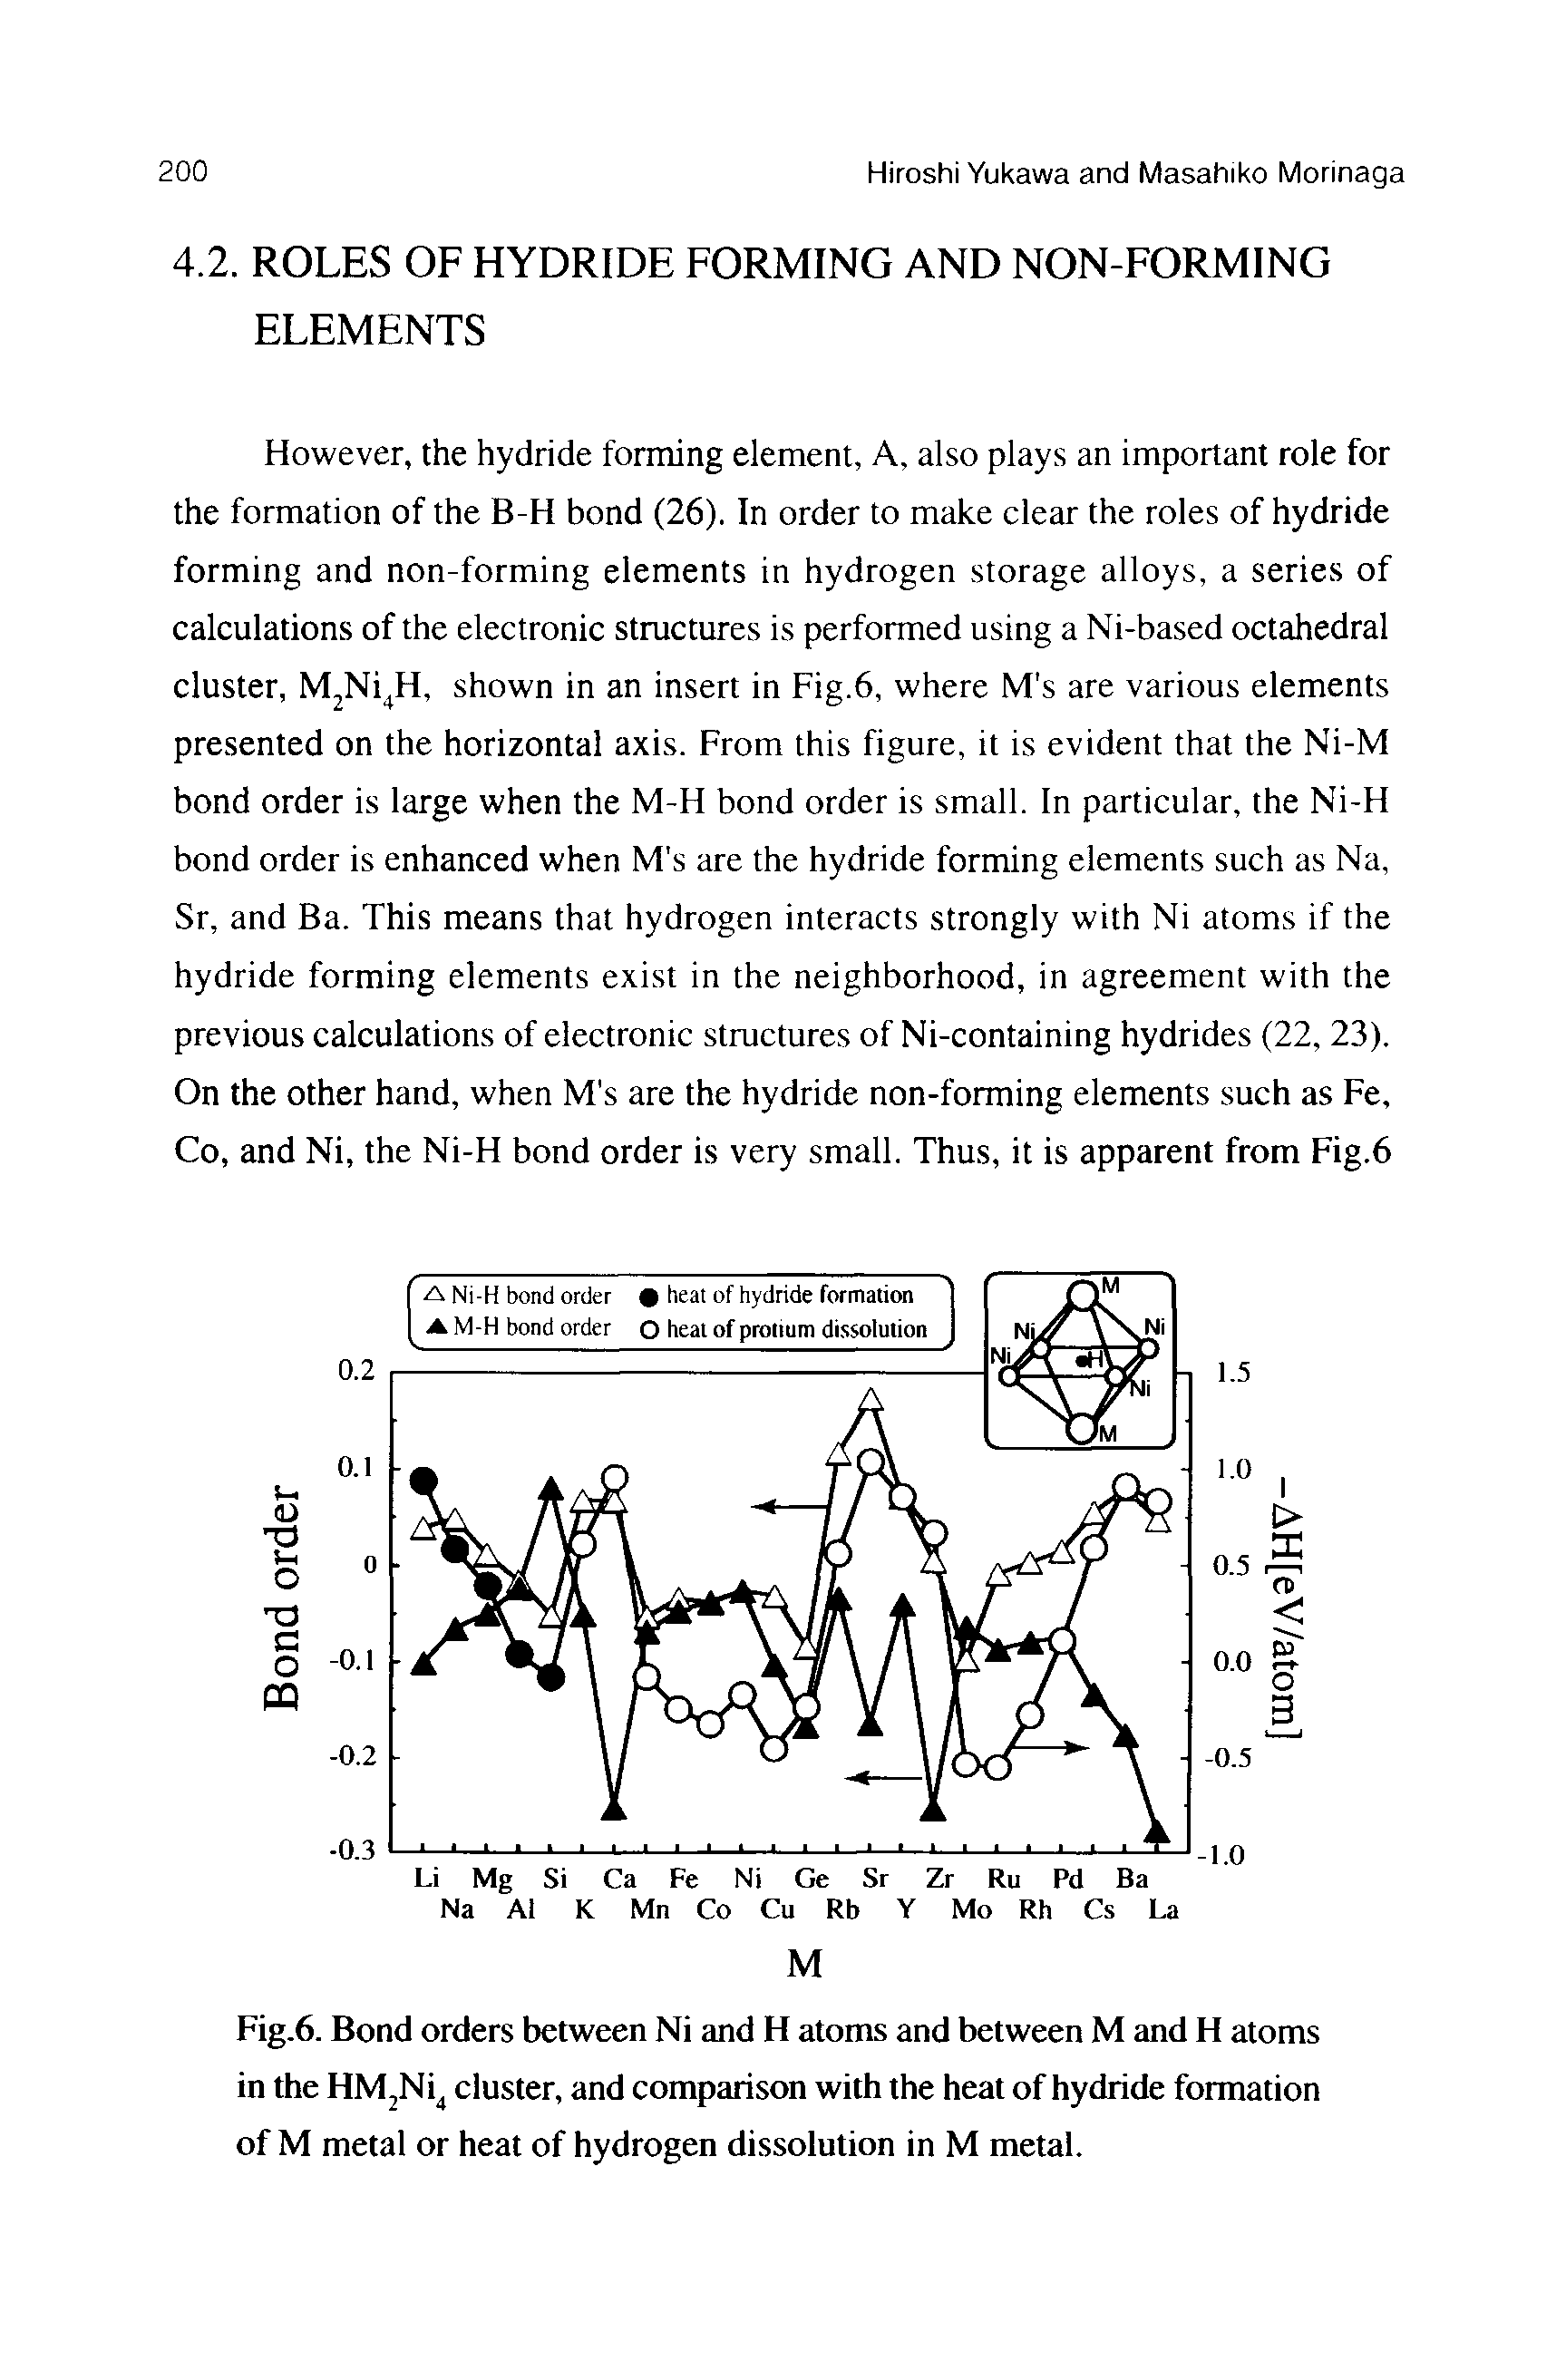 Fig.6. Bond orders between Ni and H atoms and between M and H atoms in the HM Ni cluster, and comparison with the heat of hydride formation of M metal or heat of hydrogen dissolution in M metal.